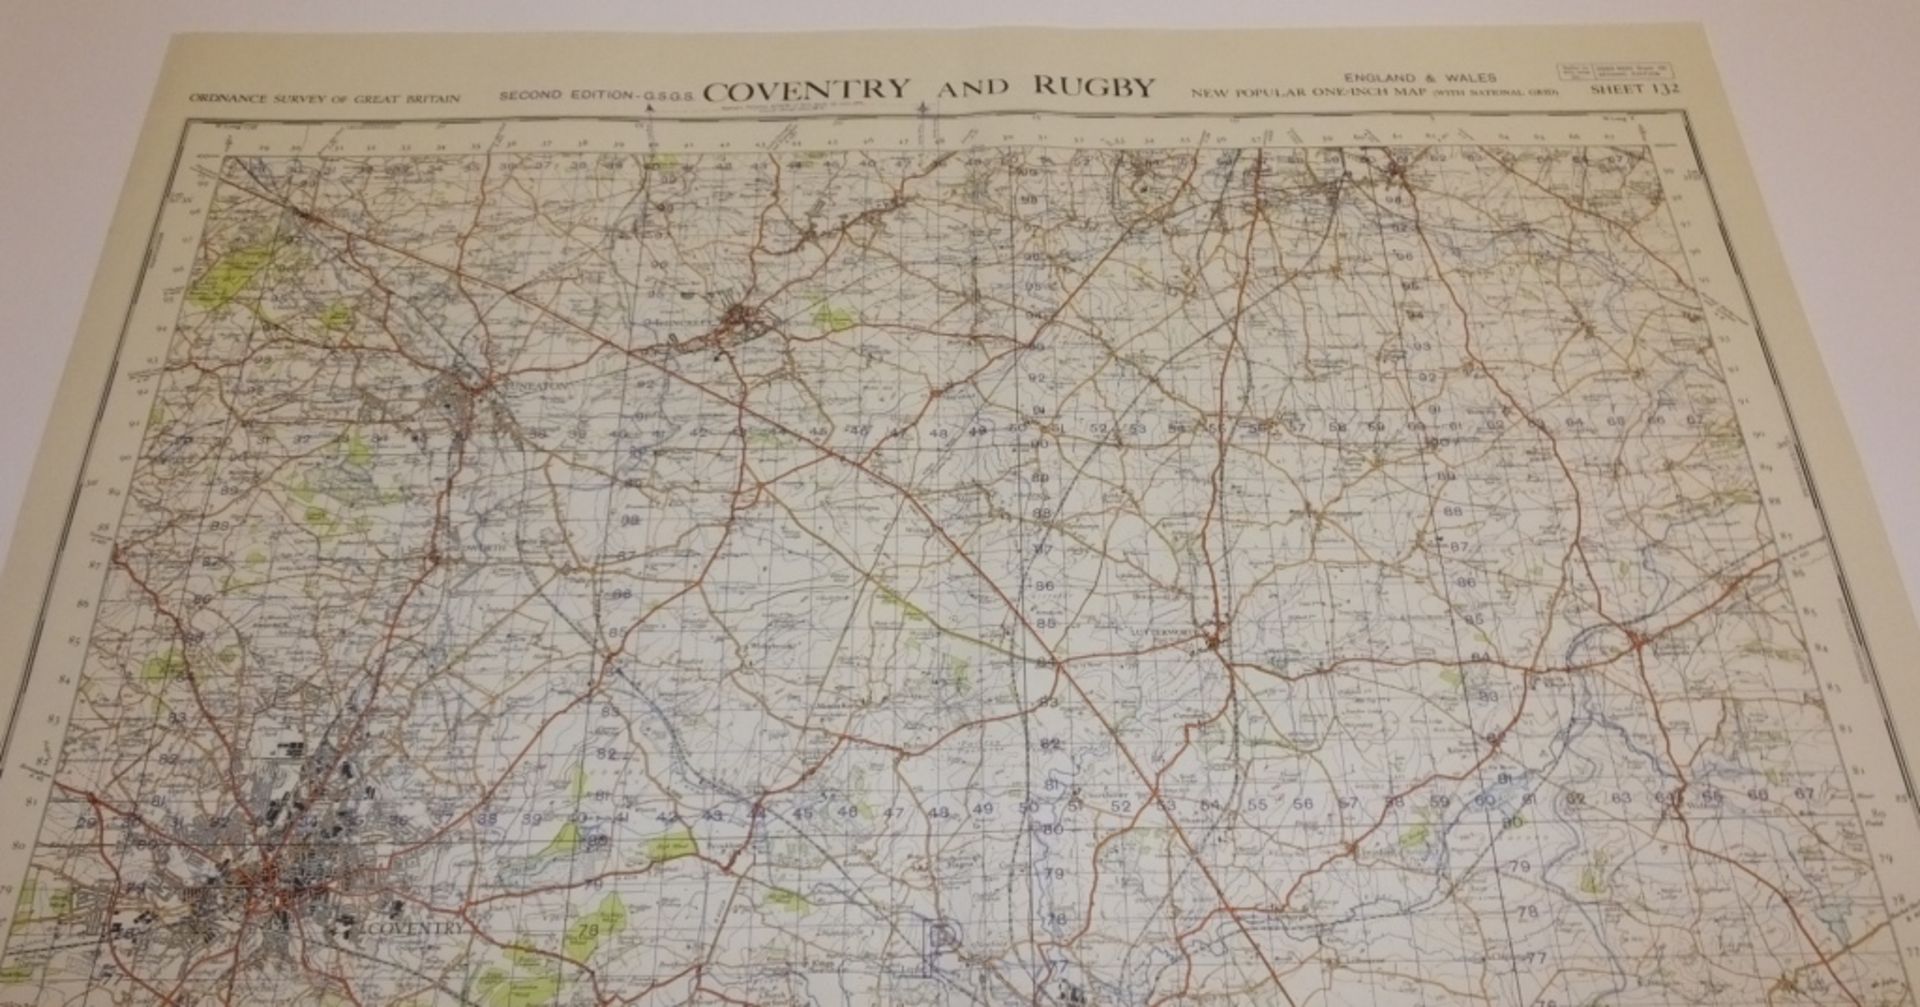 18x ENGLAND & WALES MAP COVENTRY RUENGLAND & WALESY 1INCH 1MILE 1952 2ND EDITION 4620GSGS - Bild 2 aus 5